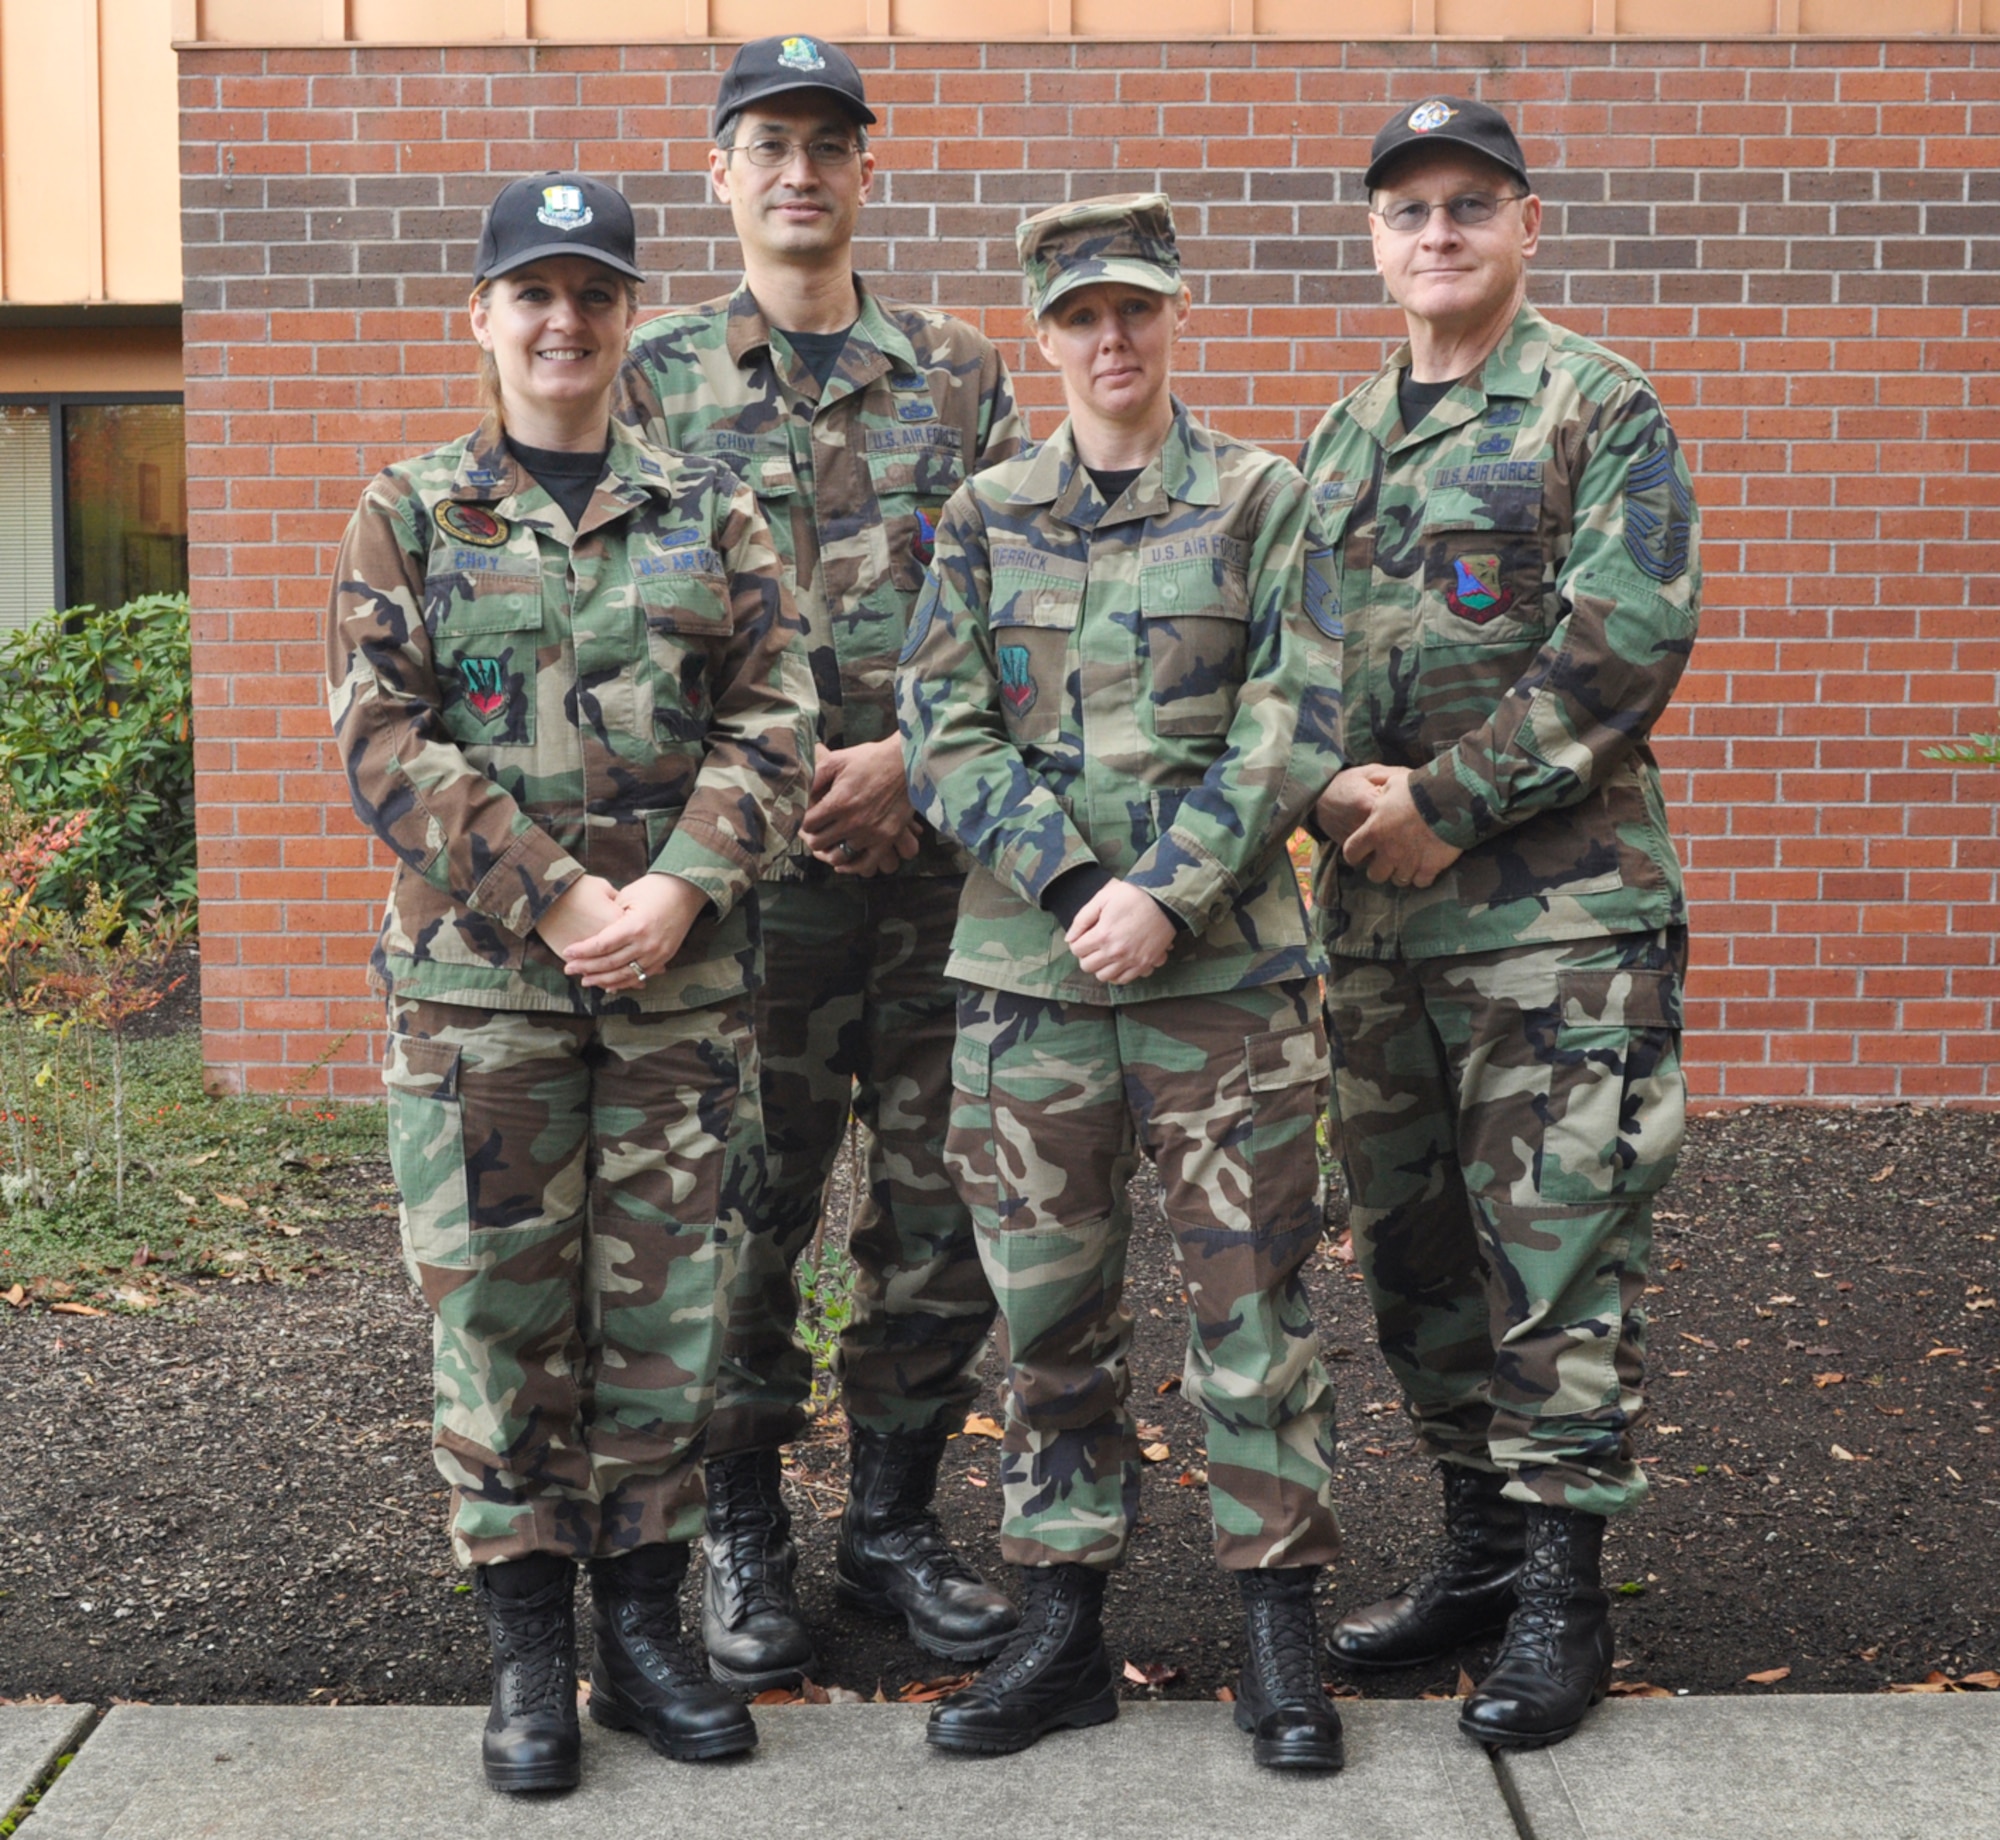 Oregon Air National Guard members wear their Battle Dress Uniform on the last authorized day to wear the BDU, in front of the Oregon Military Department, Oct. 31.  From left to right: Capt. Dawn Choy, Tech. Sgt. Nick Choy, Master Sgt. Sheryl Derrick, Chief Master Sgt. David Gardner.  (U.S. Army photo by Spc. Betty Boyce, Human Resources Benefits Assistant).